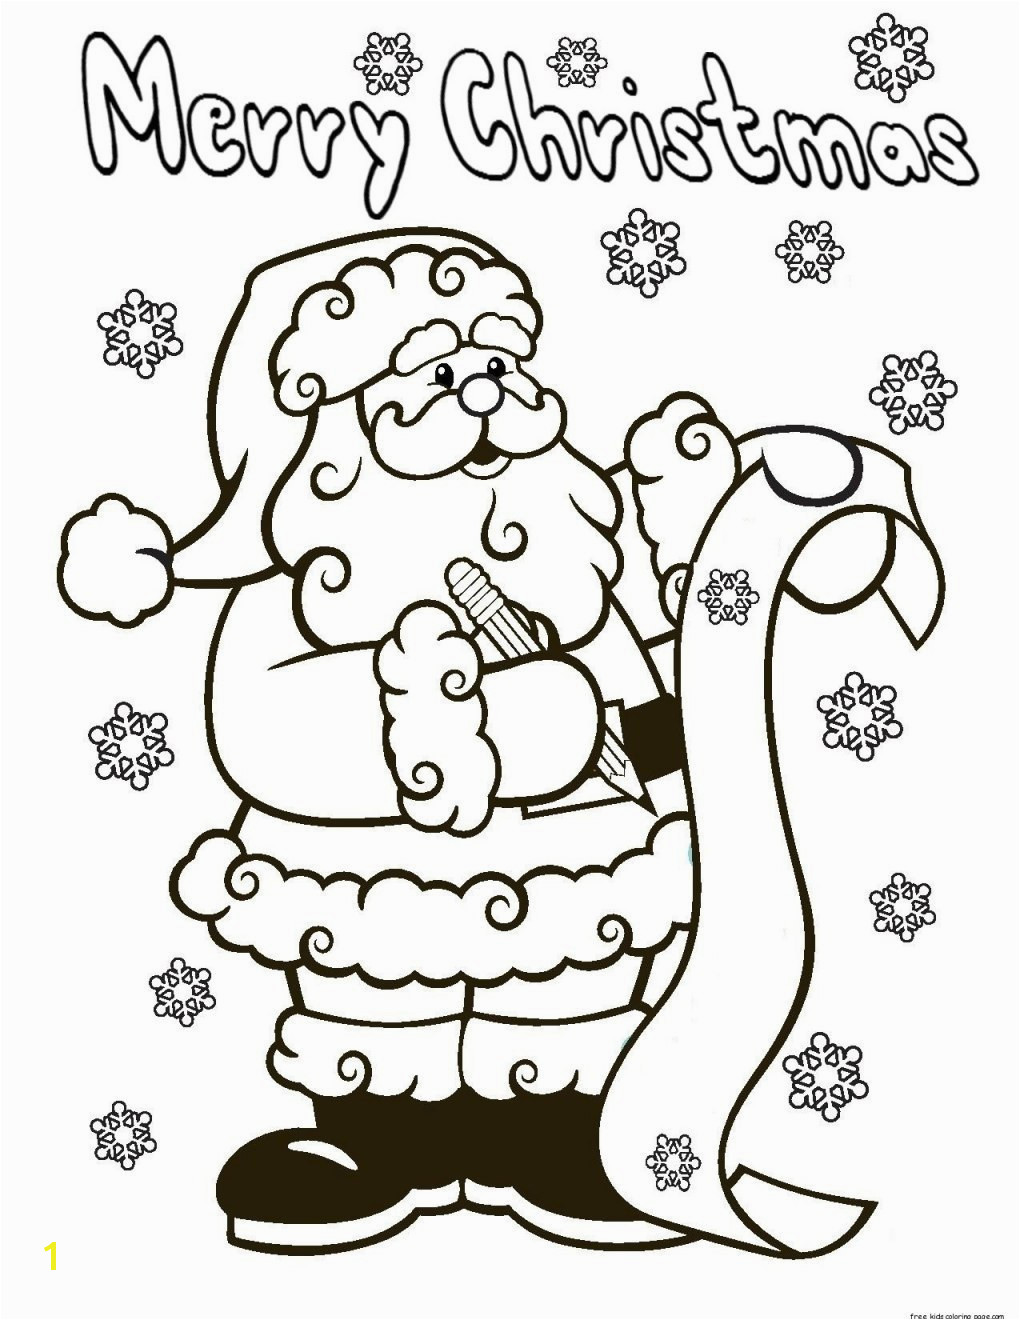 Free Download · Christmas Gift Coloring Page Luxury Awesome Santa Claus Coloring Sheet Design